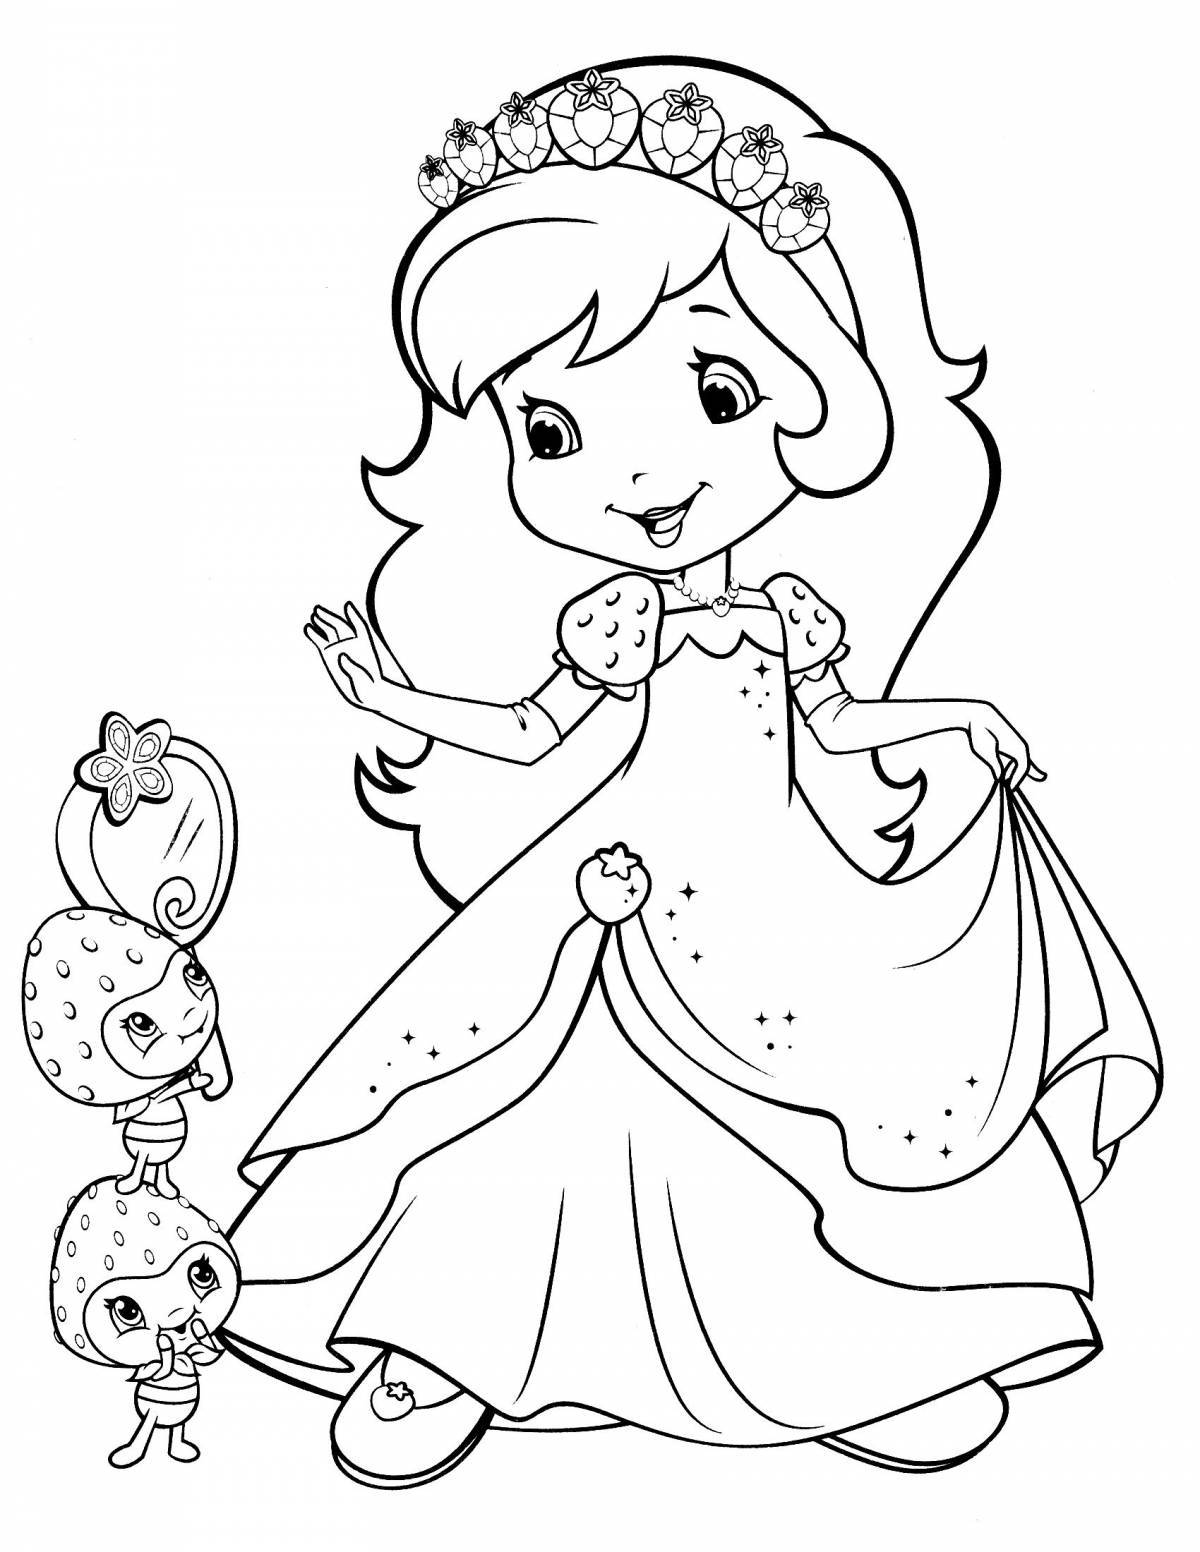 Adorable princess coloring book for kids 3-4 years old